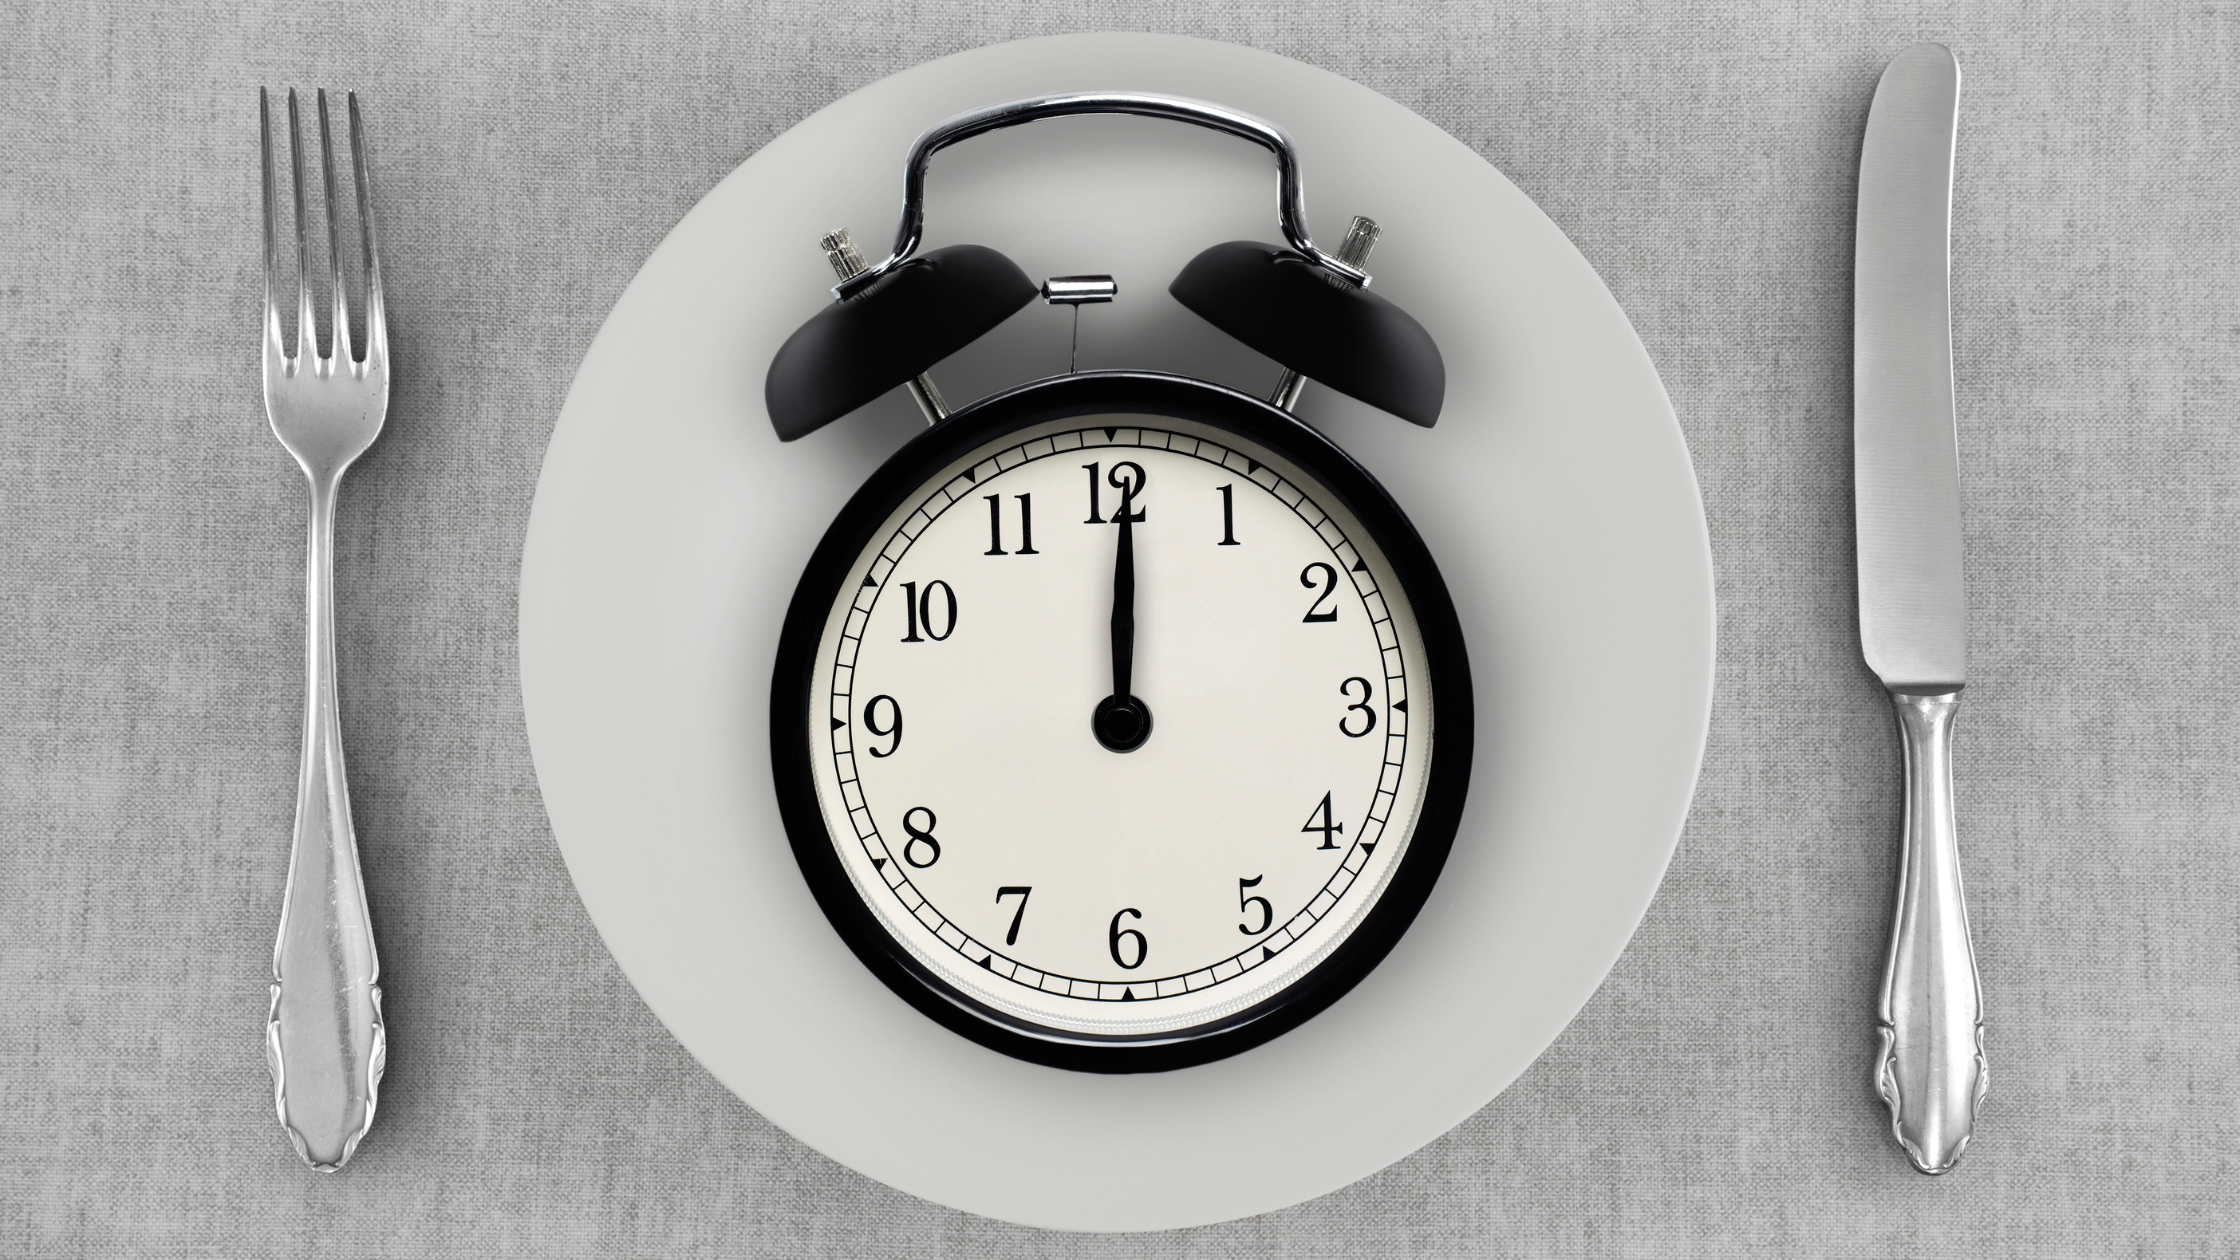 Get Healthy Sleep by Eating on a Schedule